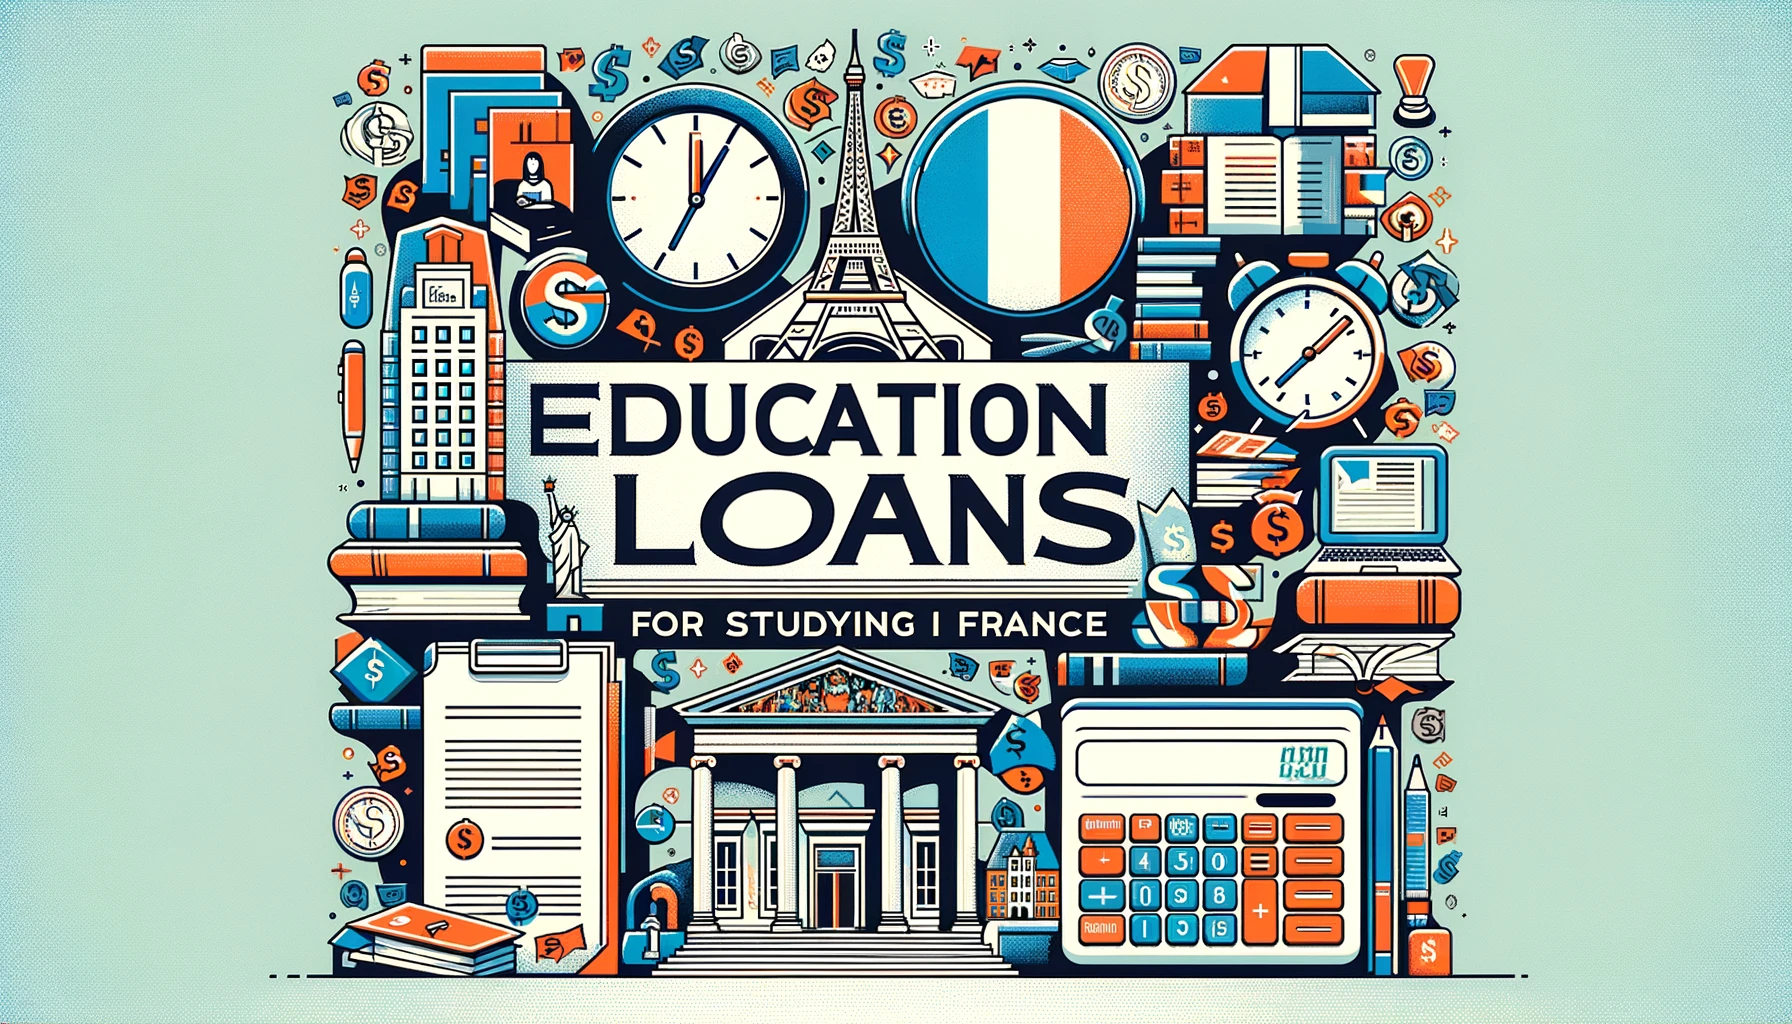 Education Loans for Studying in France